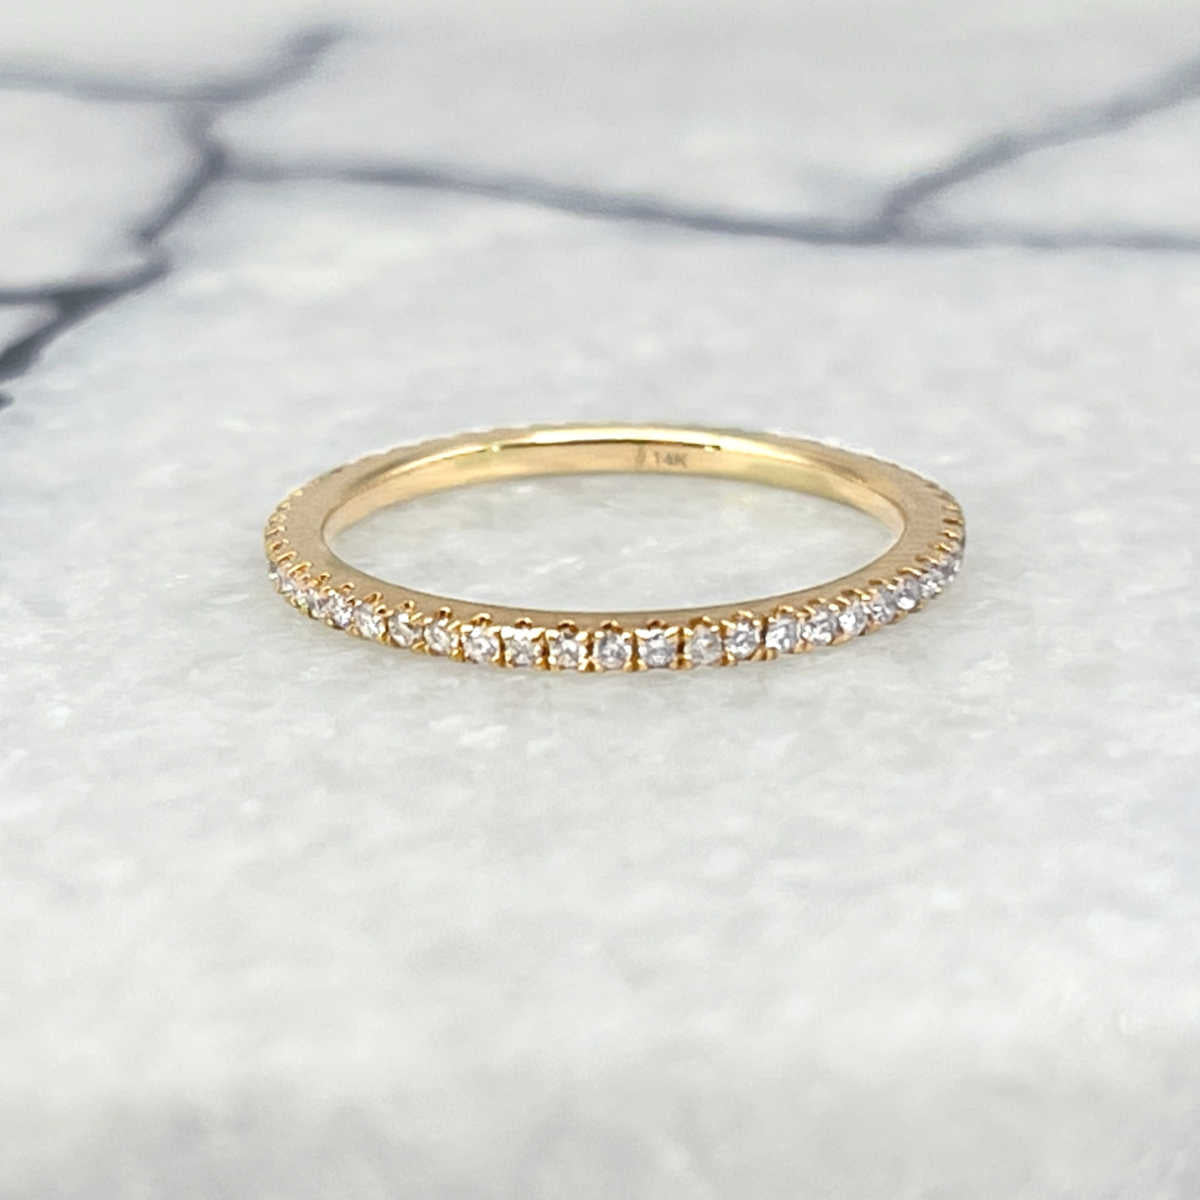 Diamond Midi Ring, 14K Gold Eternity Band for Knuckle or Pinky | Two of Most Fine Jewelry